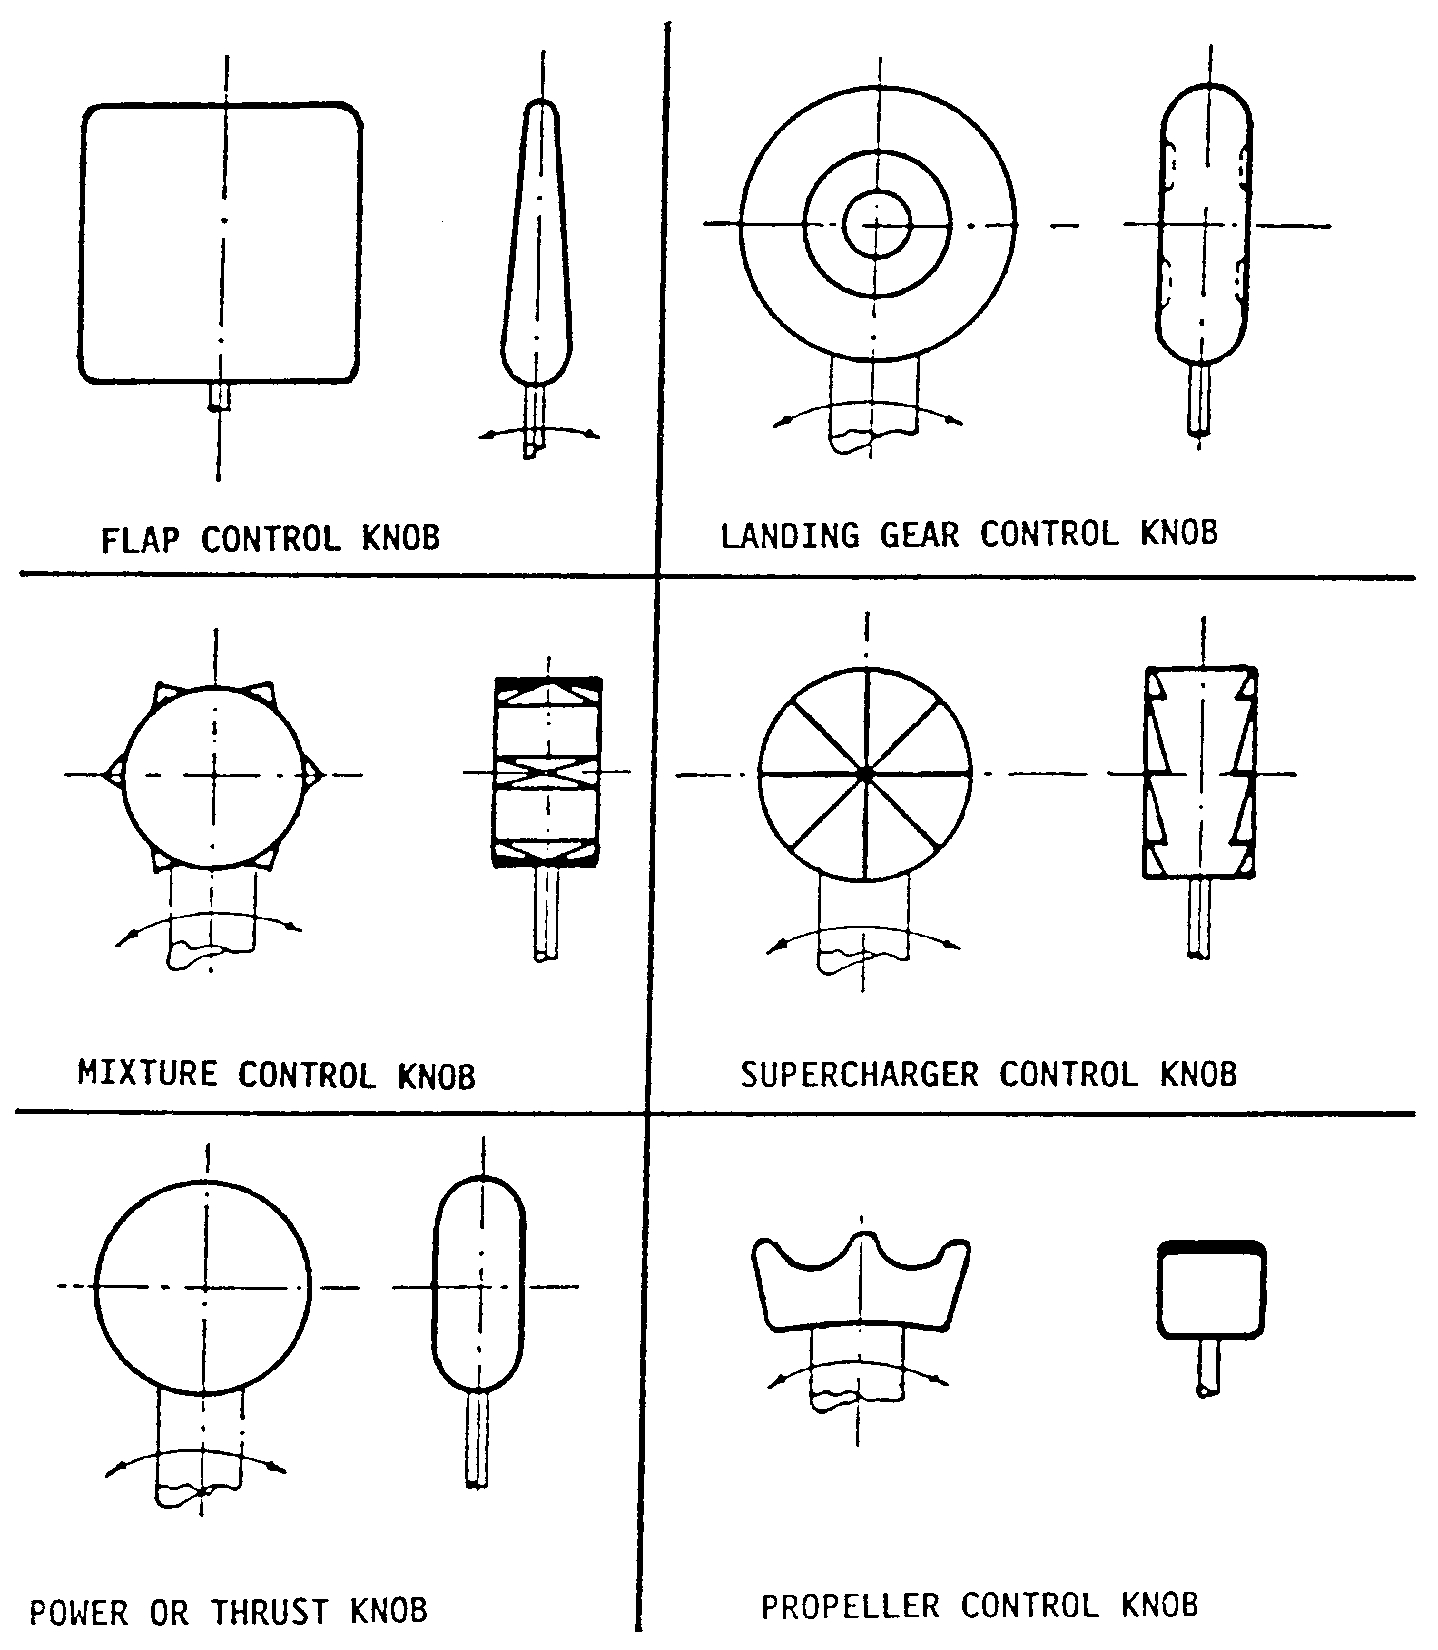 Graphic of Cockpit control knobs must conform to the general shapes (but not necessarily the exact sizes or specific proportions) in the following figure